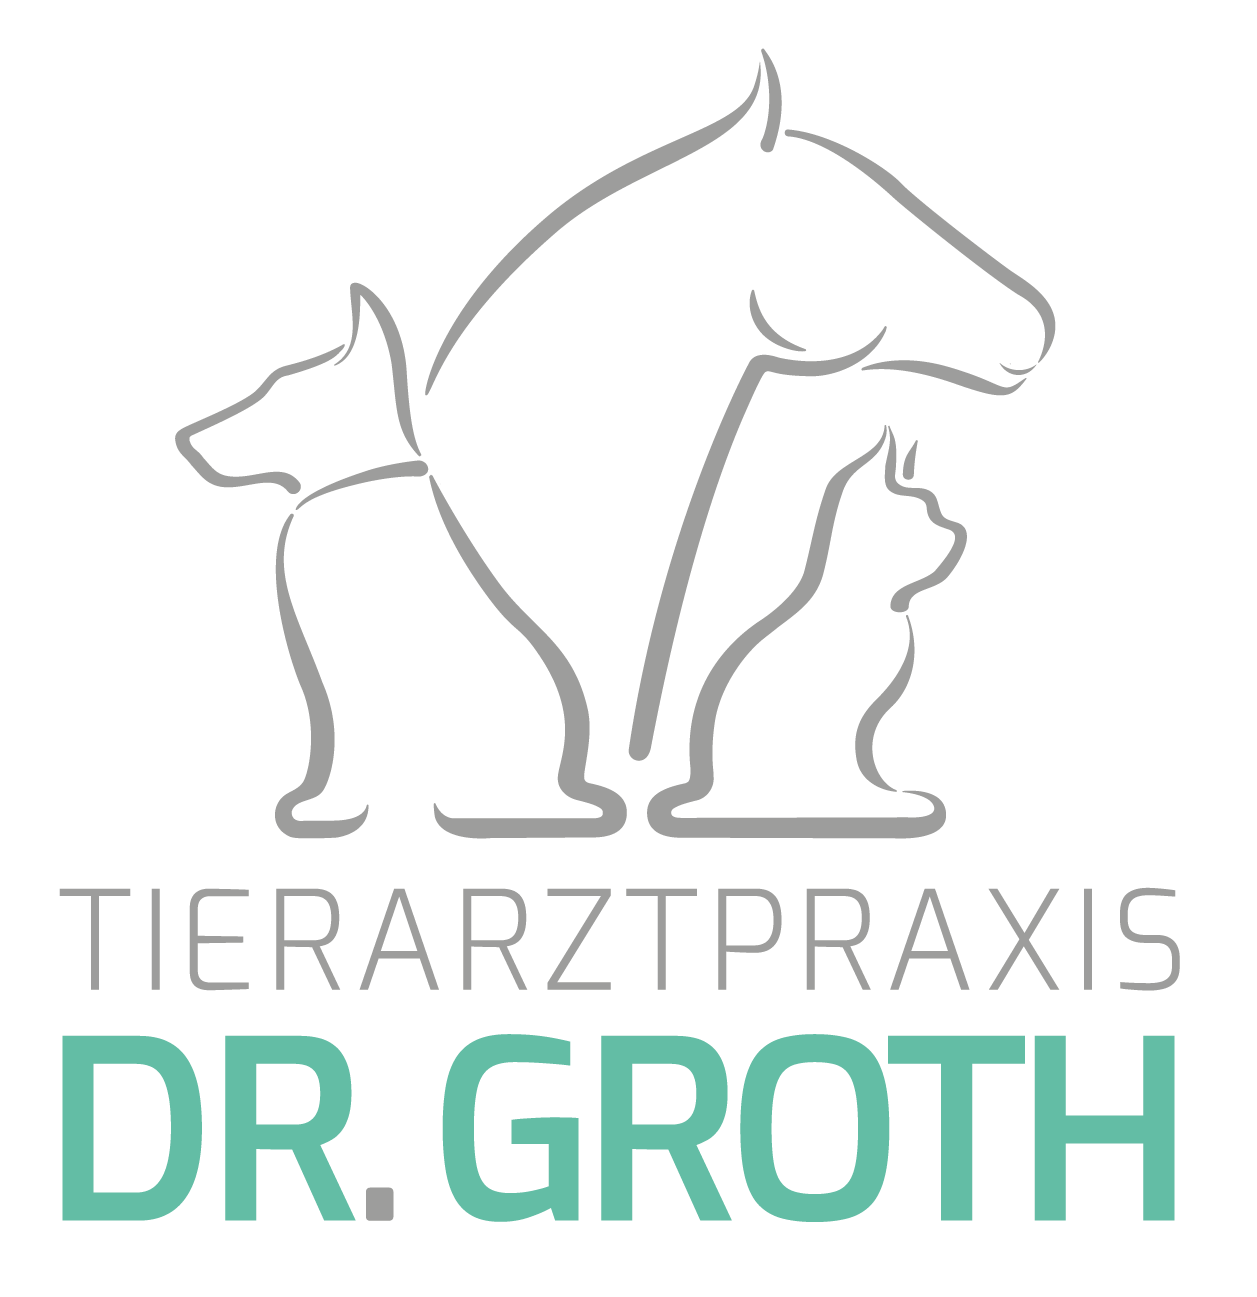 Tierarztpraxis Dr. Groth